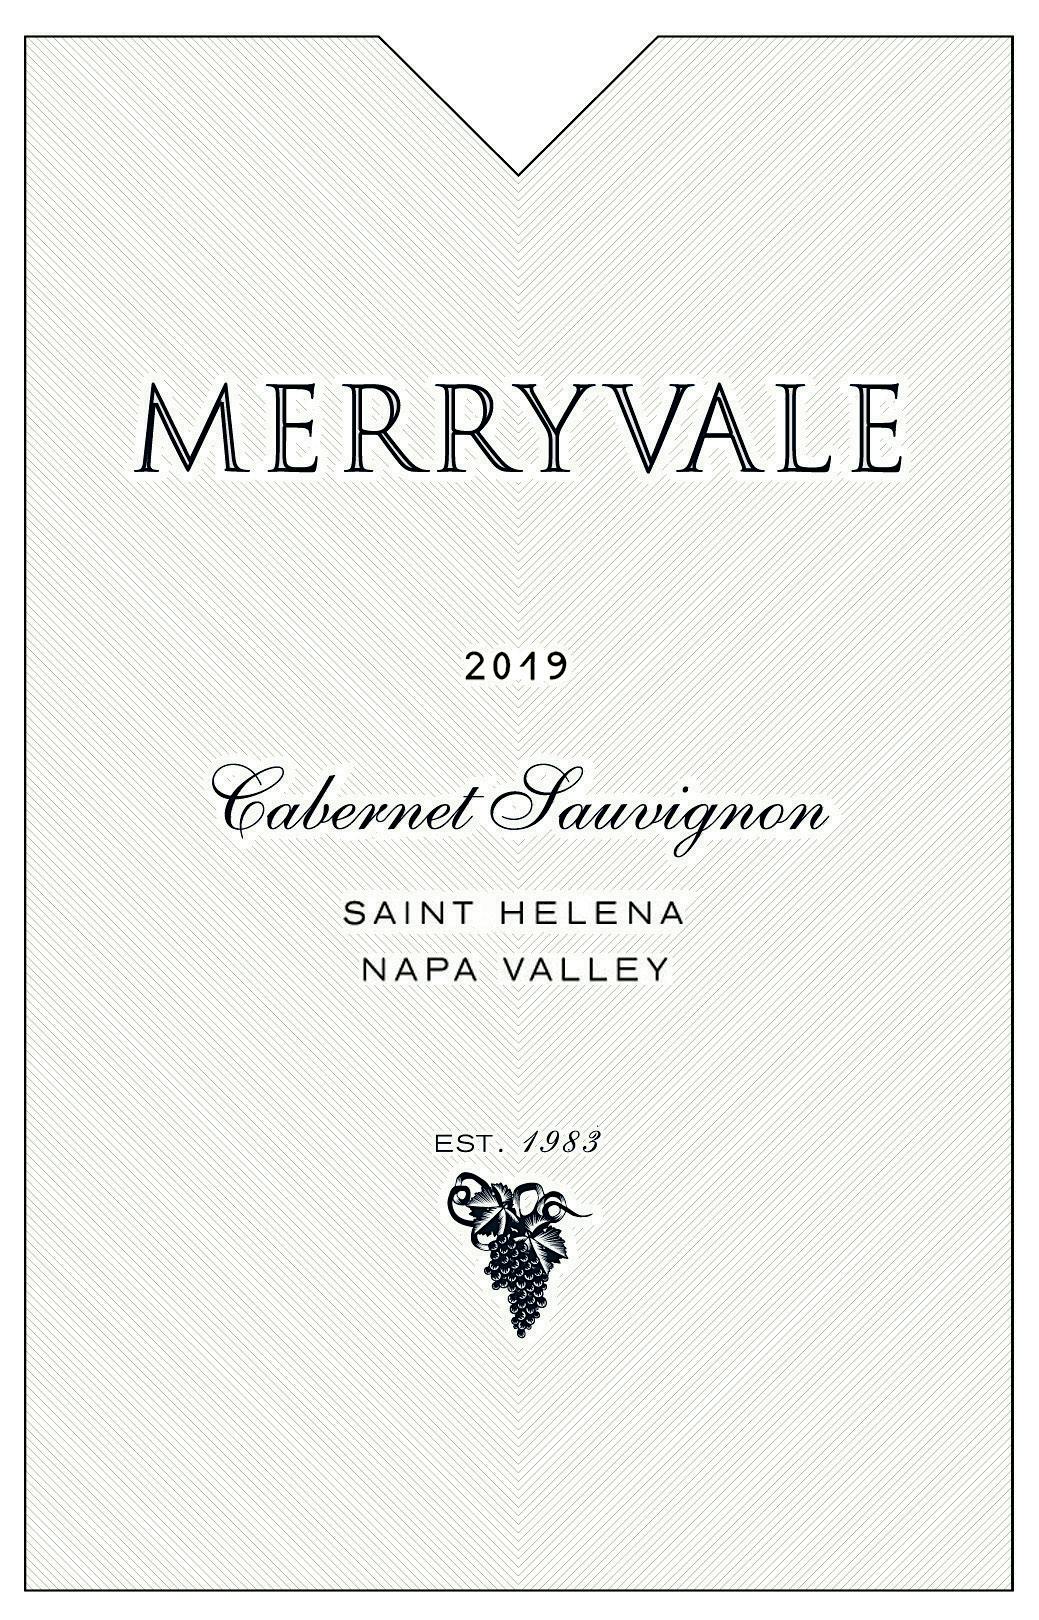 Label for Merryvale